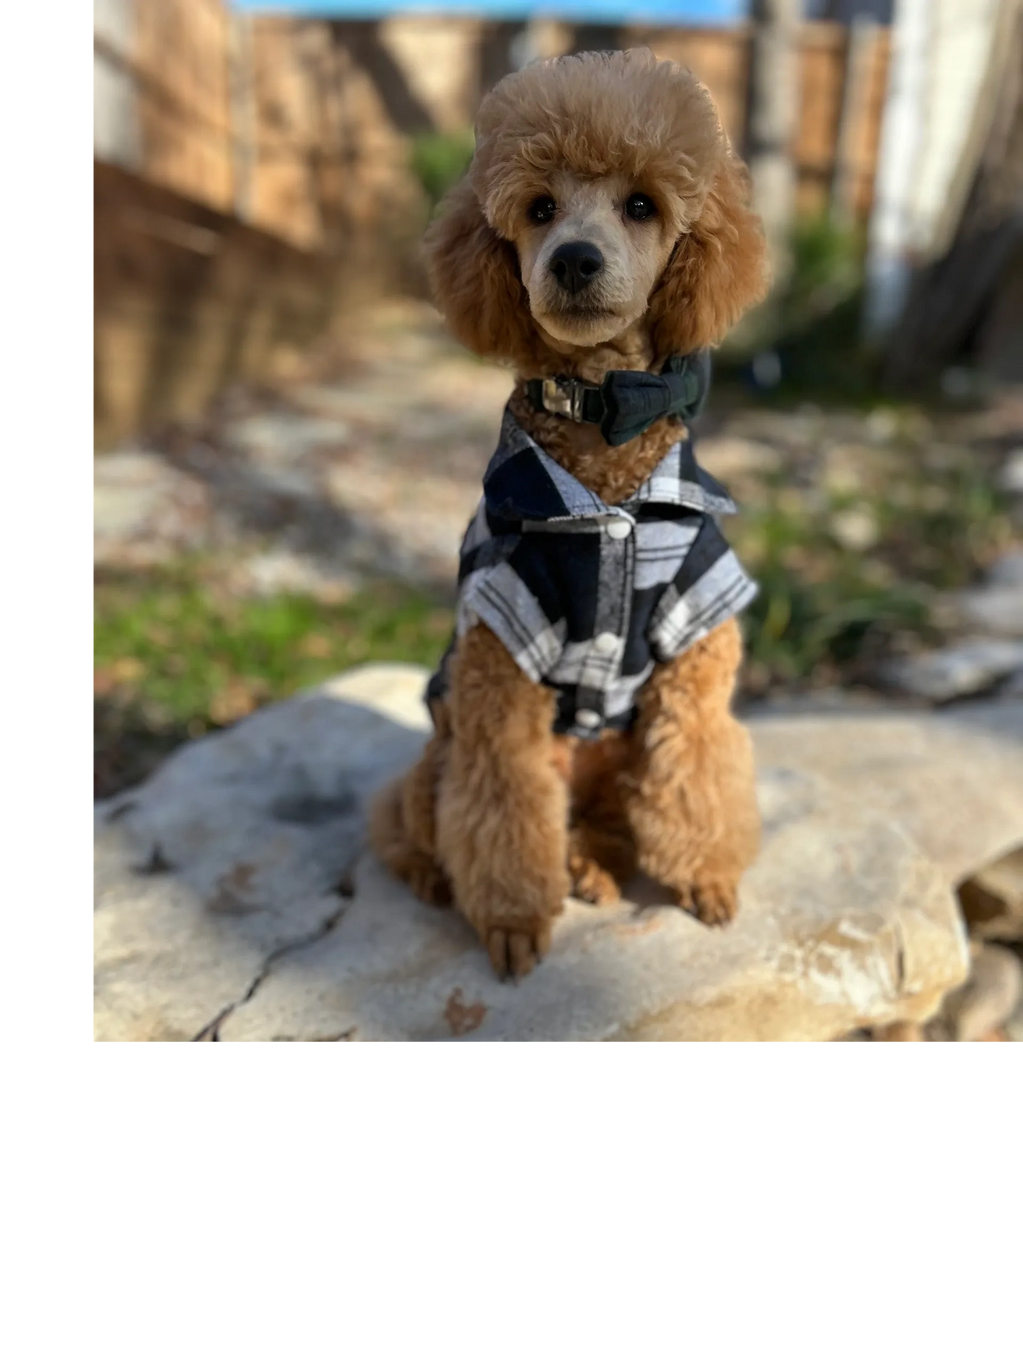 Apricot mini Poodle sitting on a rock wearing a bow tie and plaid shirt.